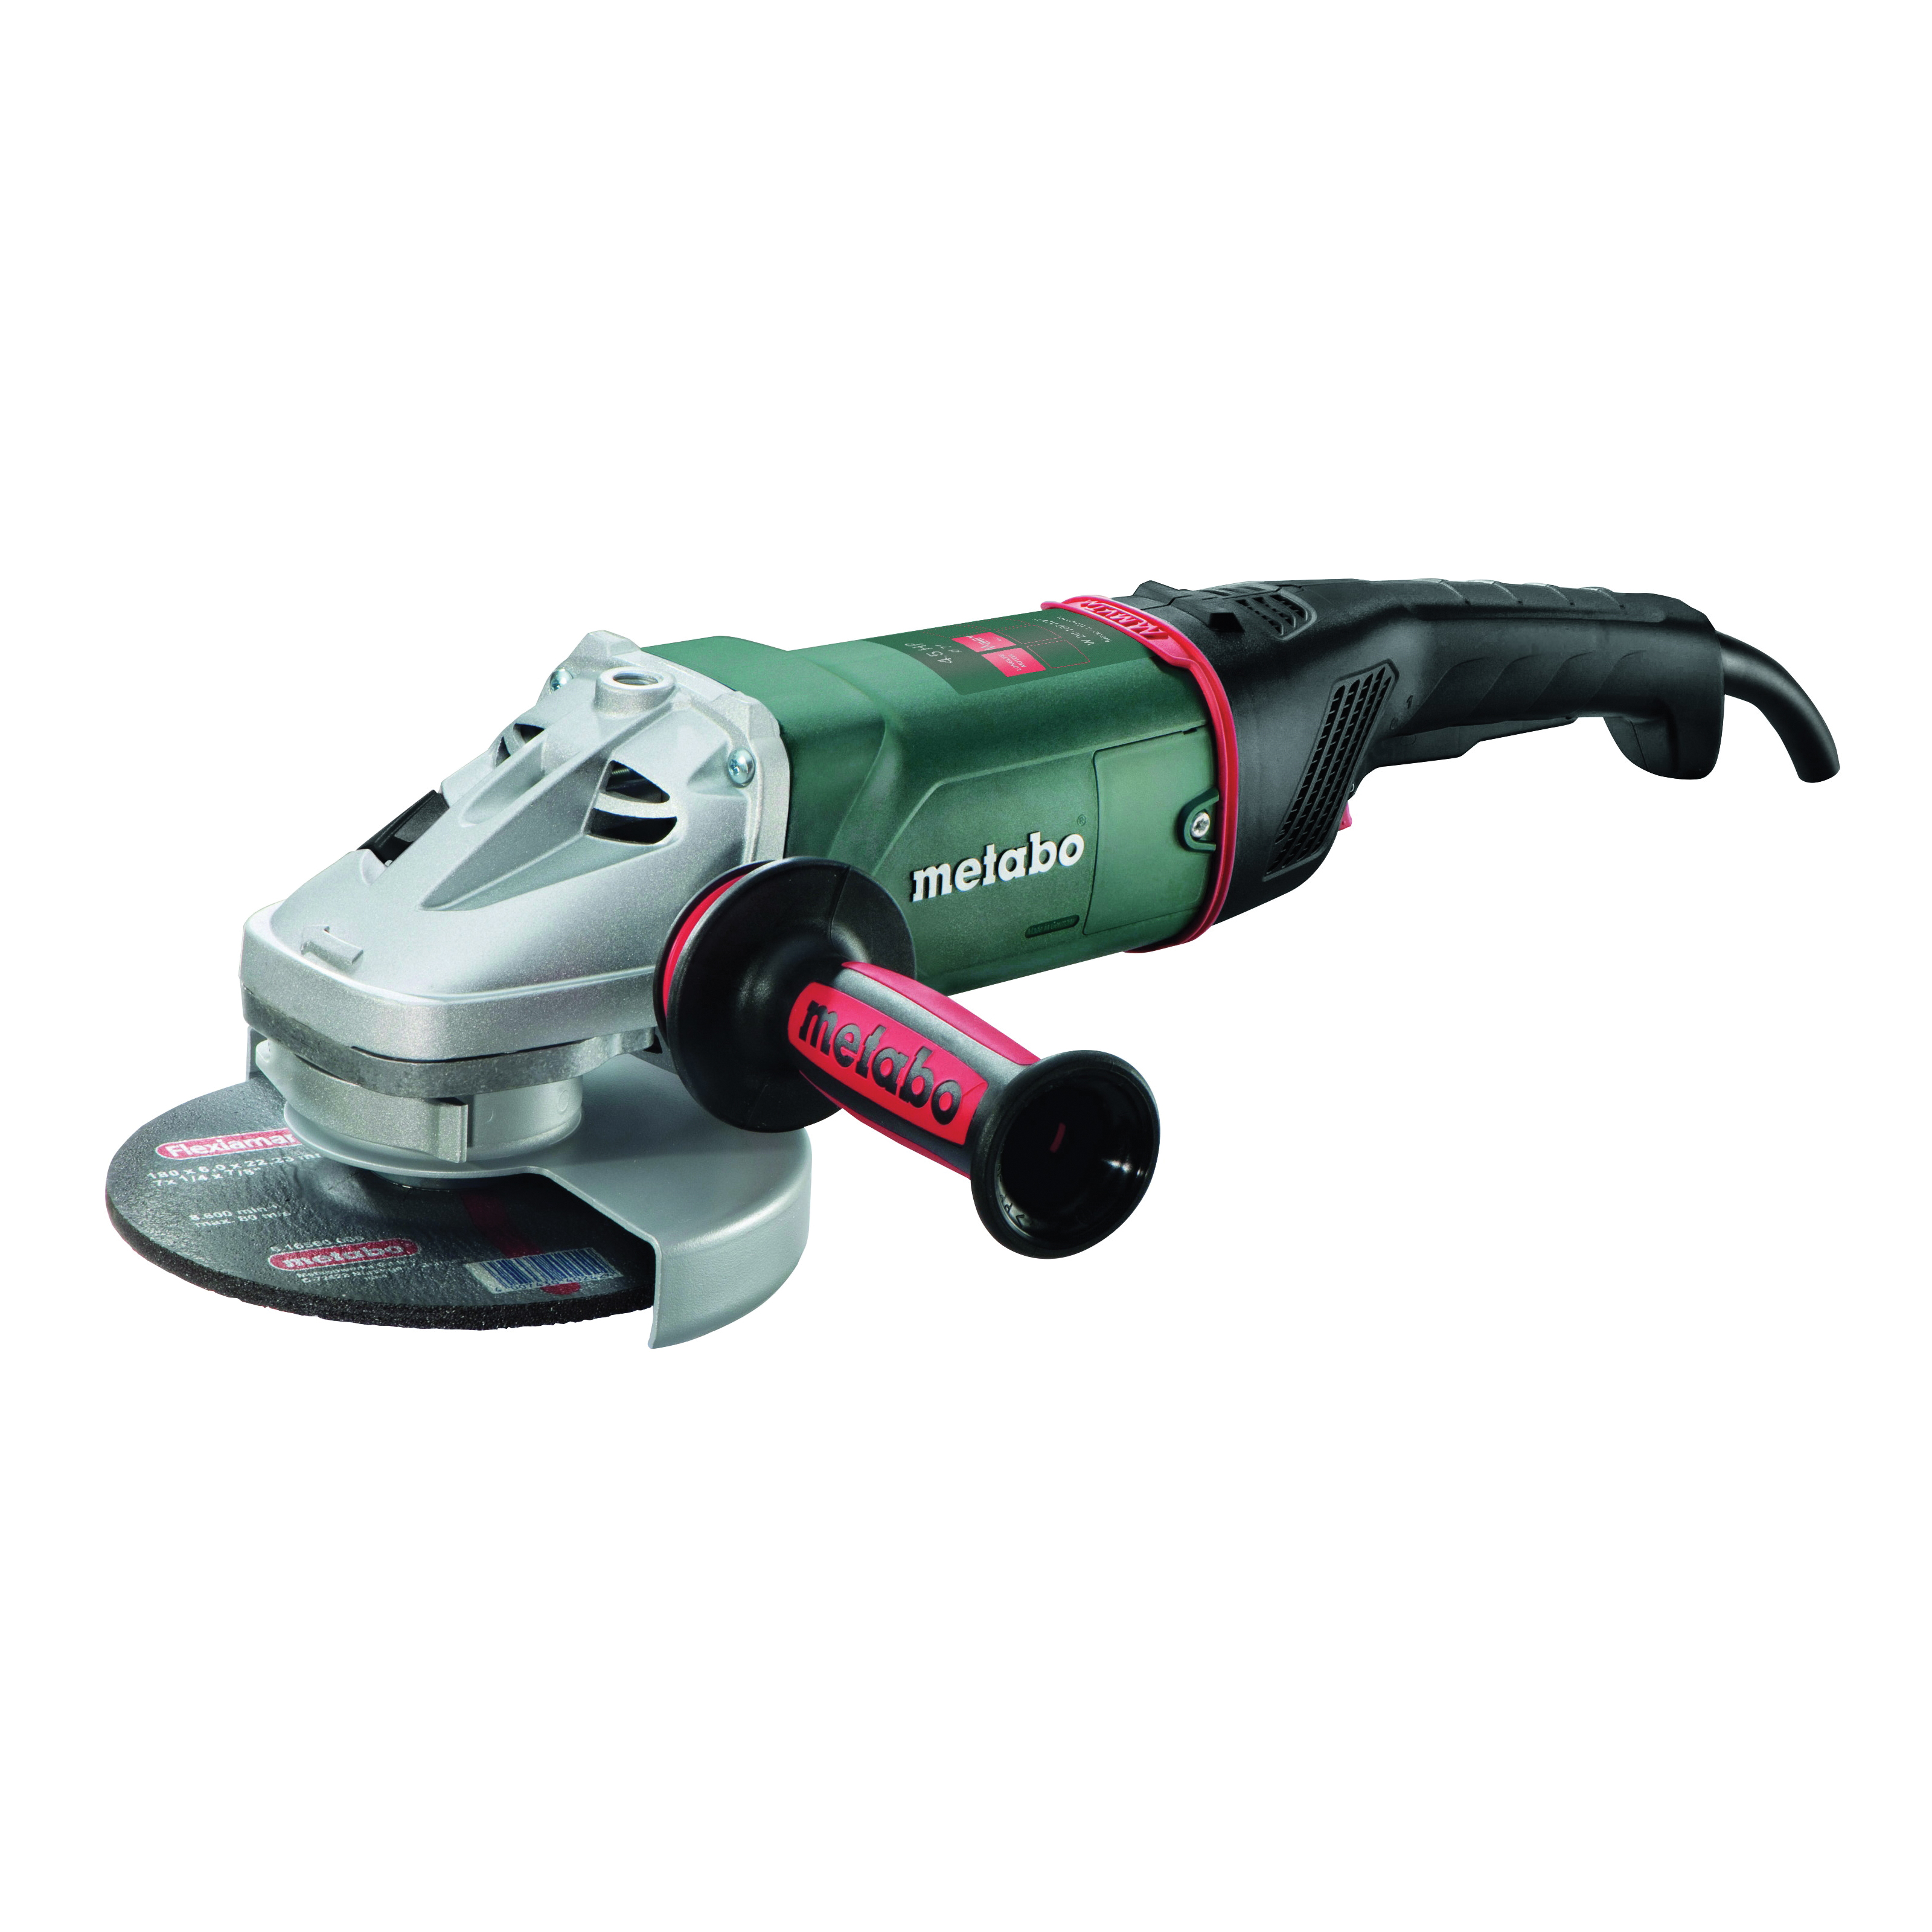 metabo® 600687420 Combination Hammer, 3200 bpm, 200 to 350 rpm No-Load